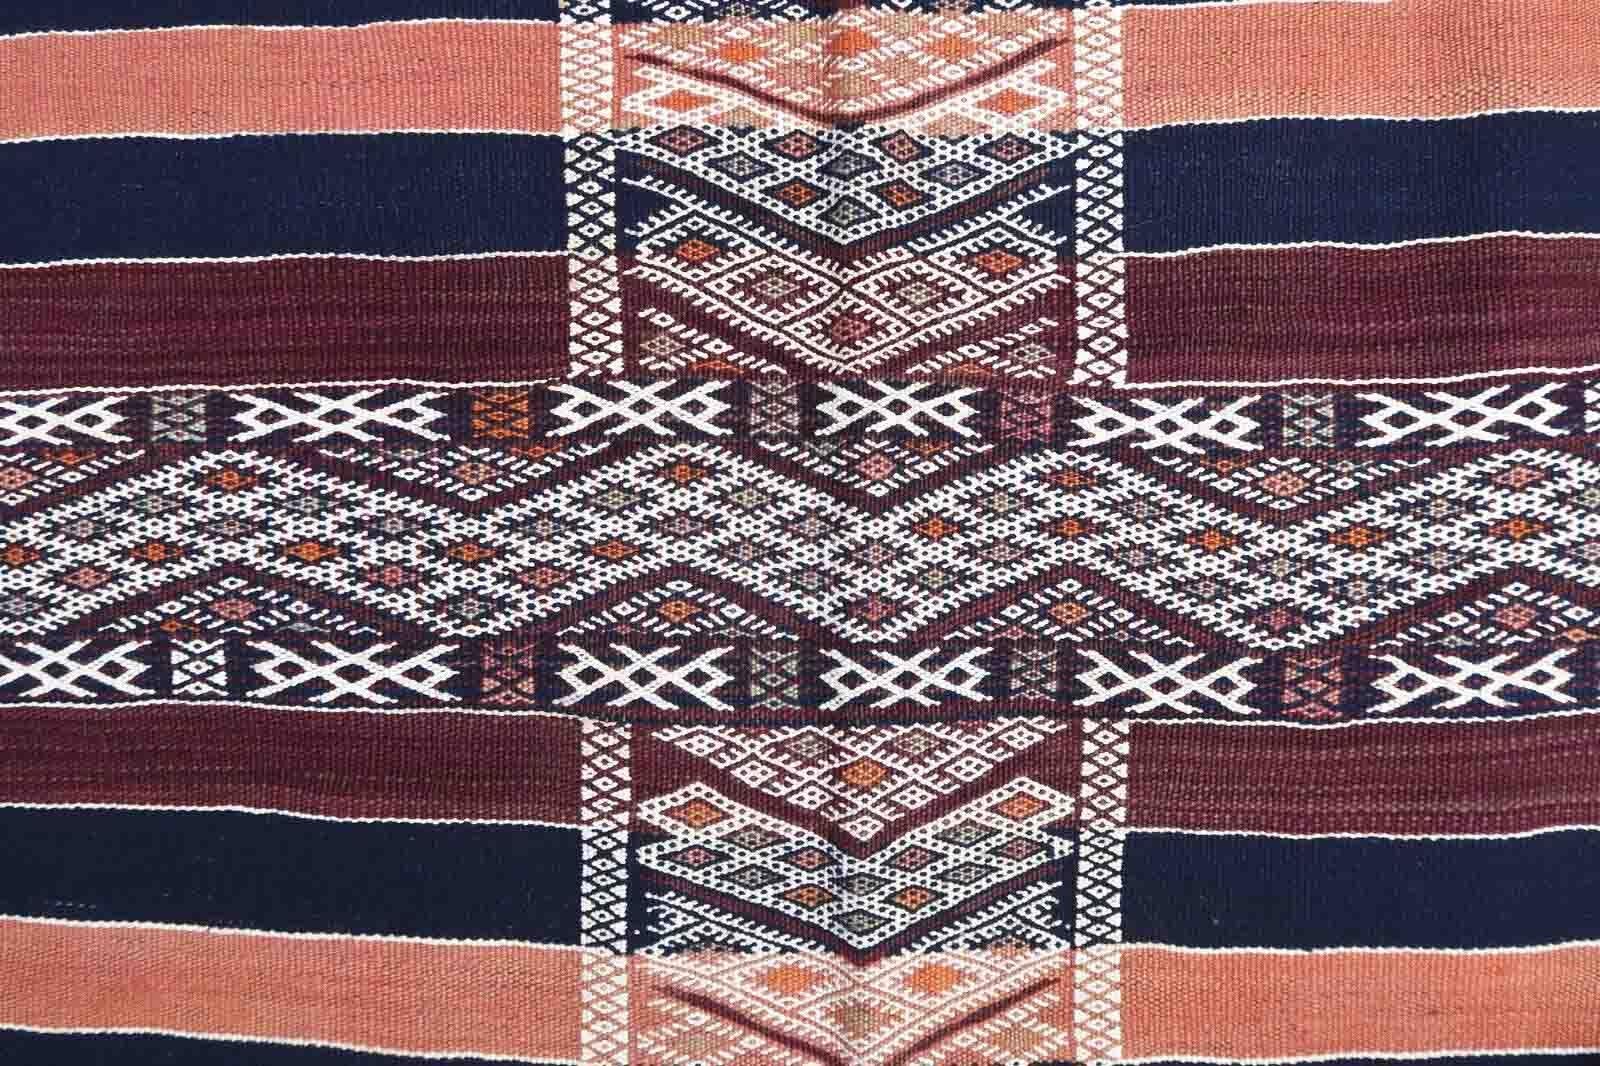 Handmade vintage Moroccan Berber kilim in geometric design. The rug is from the middle of 20th century in original good condition.

-condition: original good,

-circa: 1950s,

-size: 4.9' x 10' (150cm x 308cm),

-material: wool,

-country of origin: